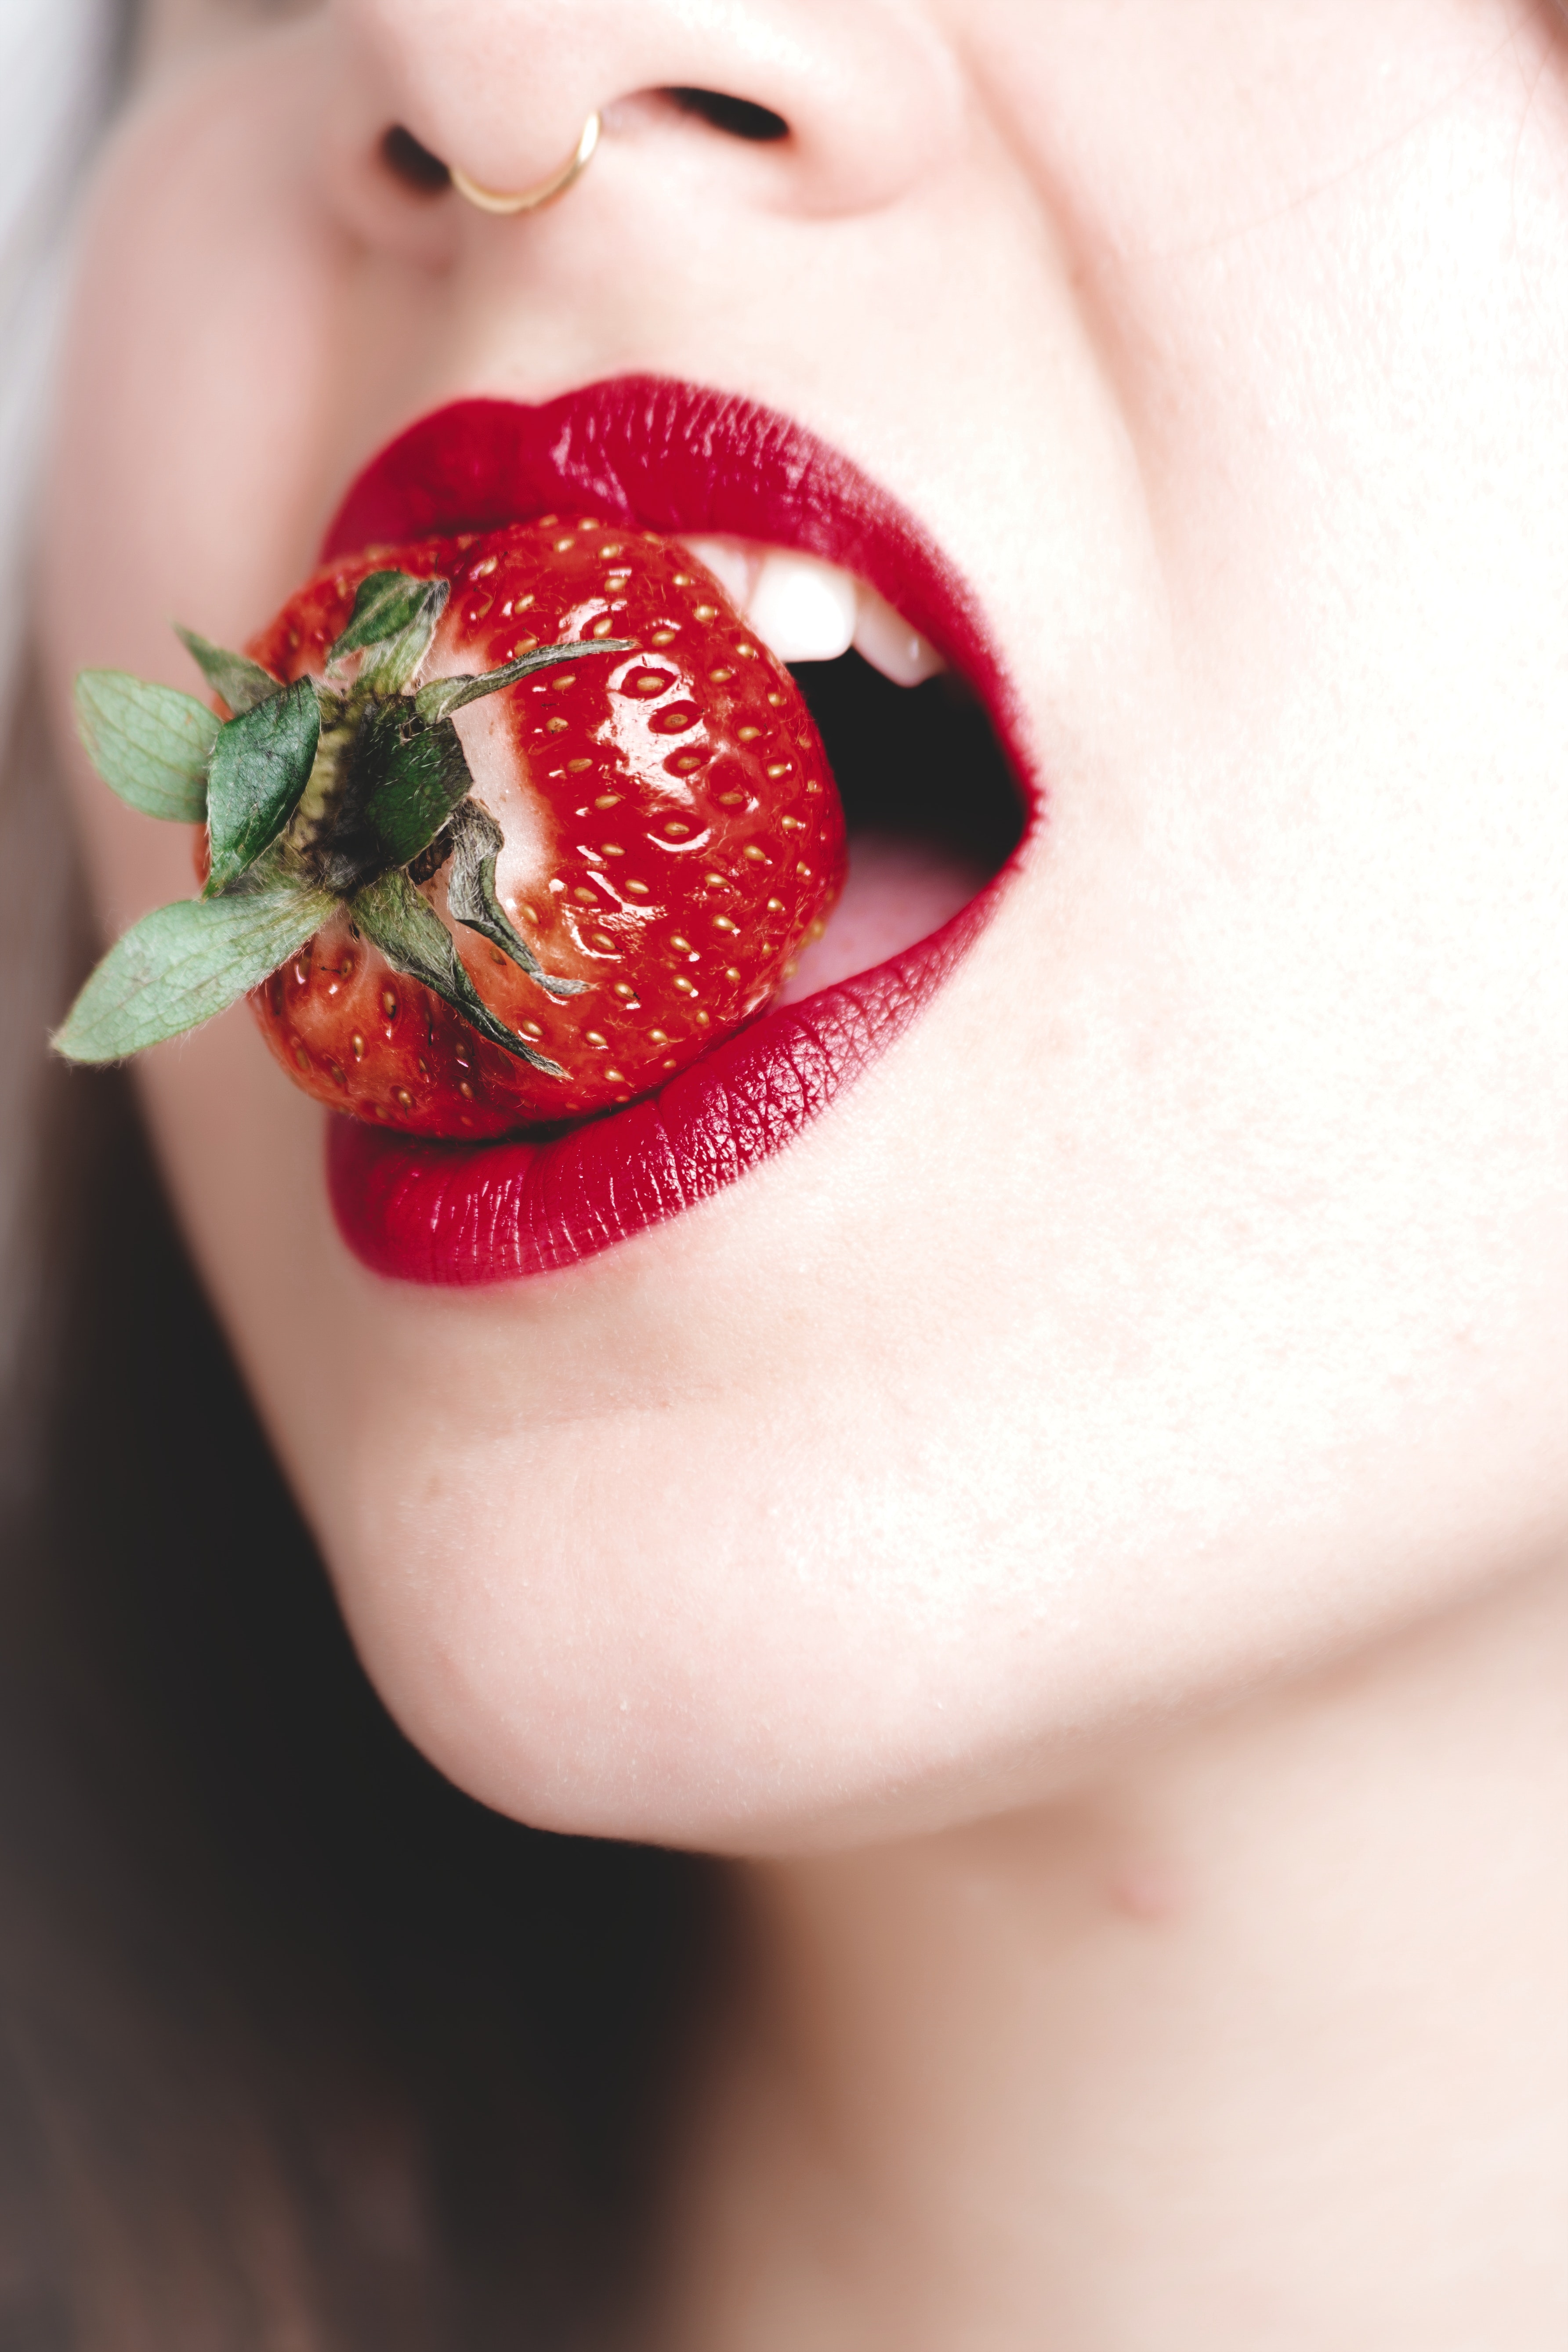 Free Photo Woman With Red Lipstick Biting Strawberry Mouth Young